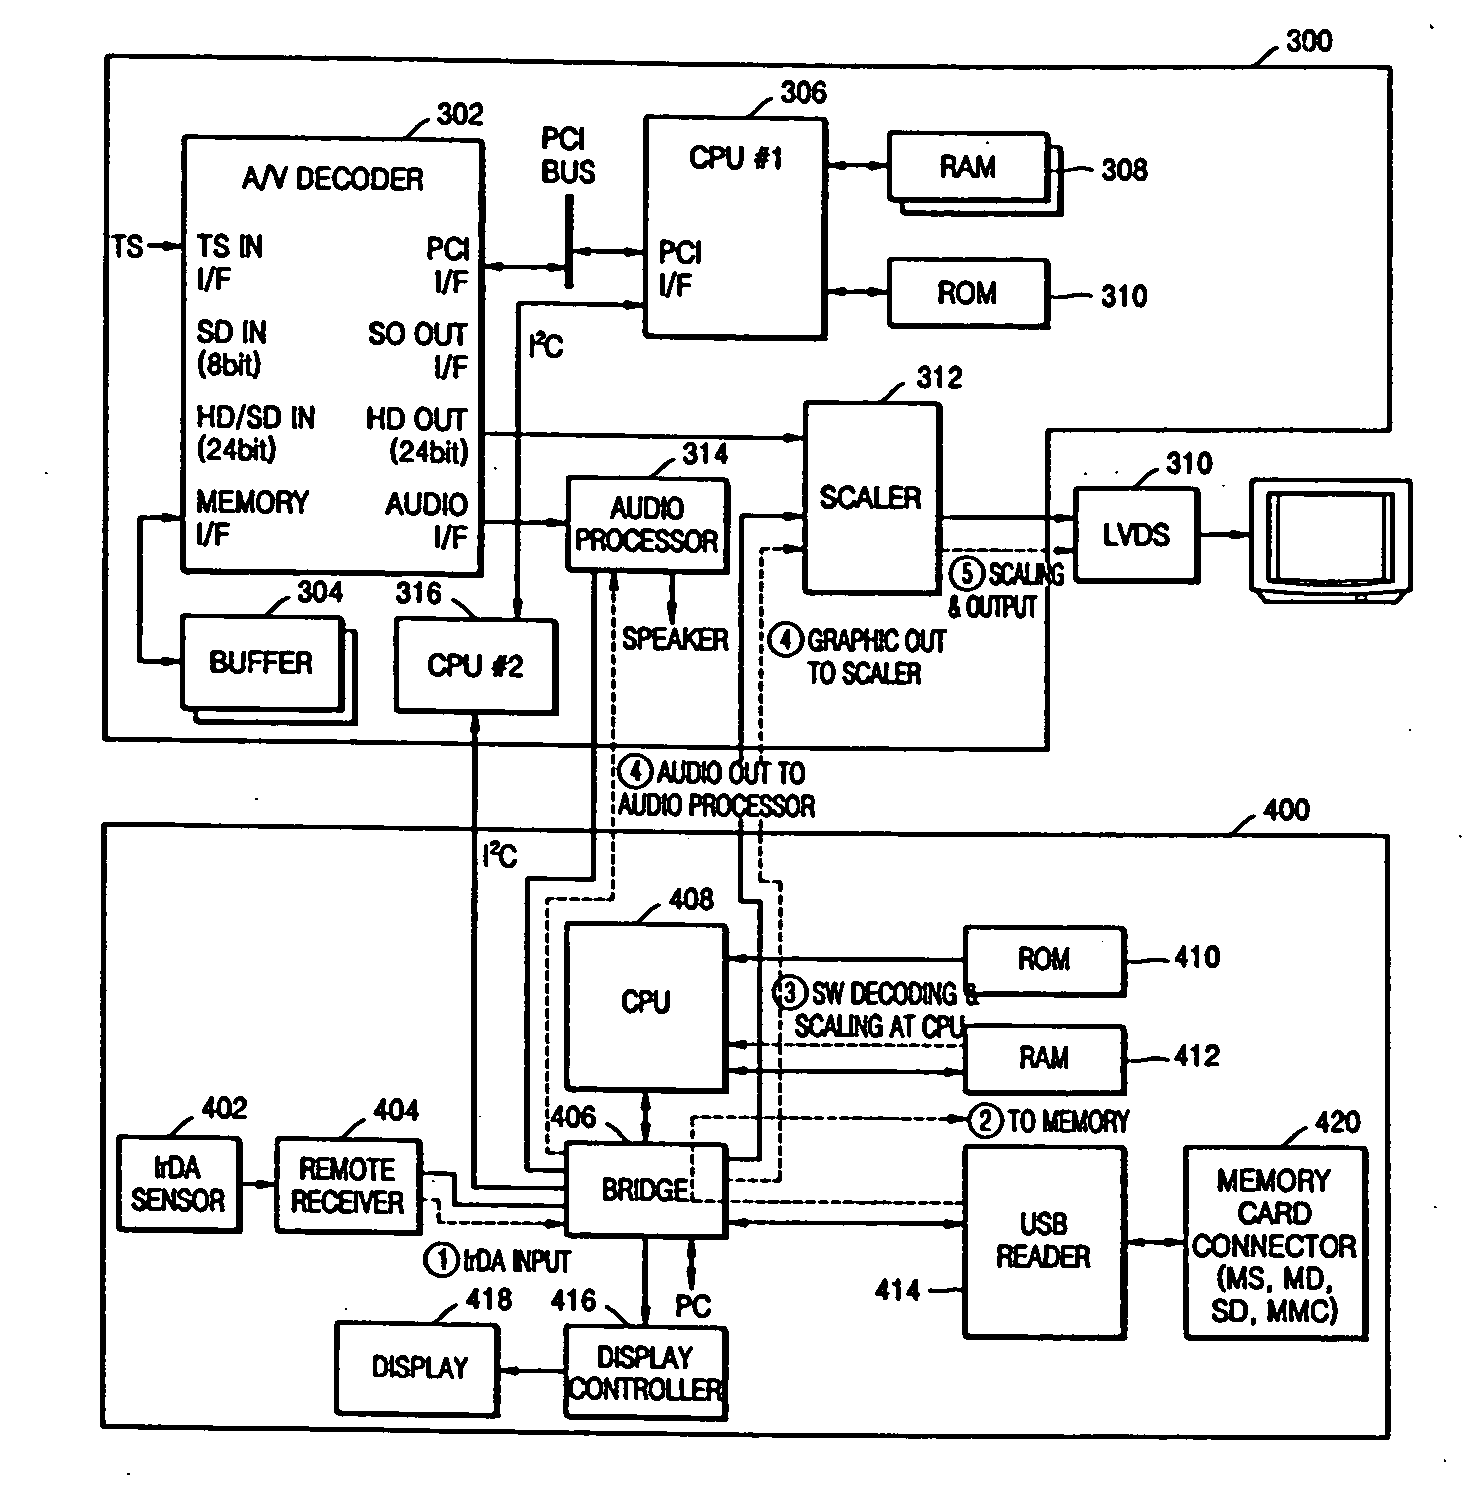 Digital audio/video apparatus and method that can perform additional operations